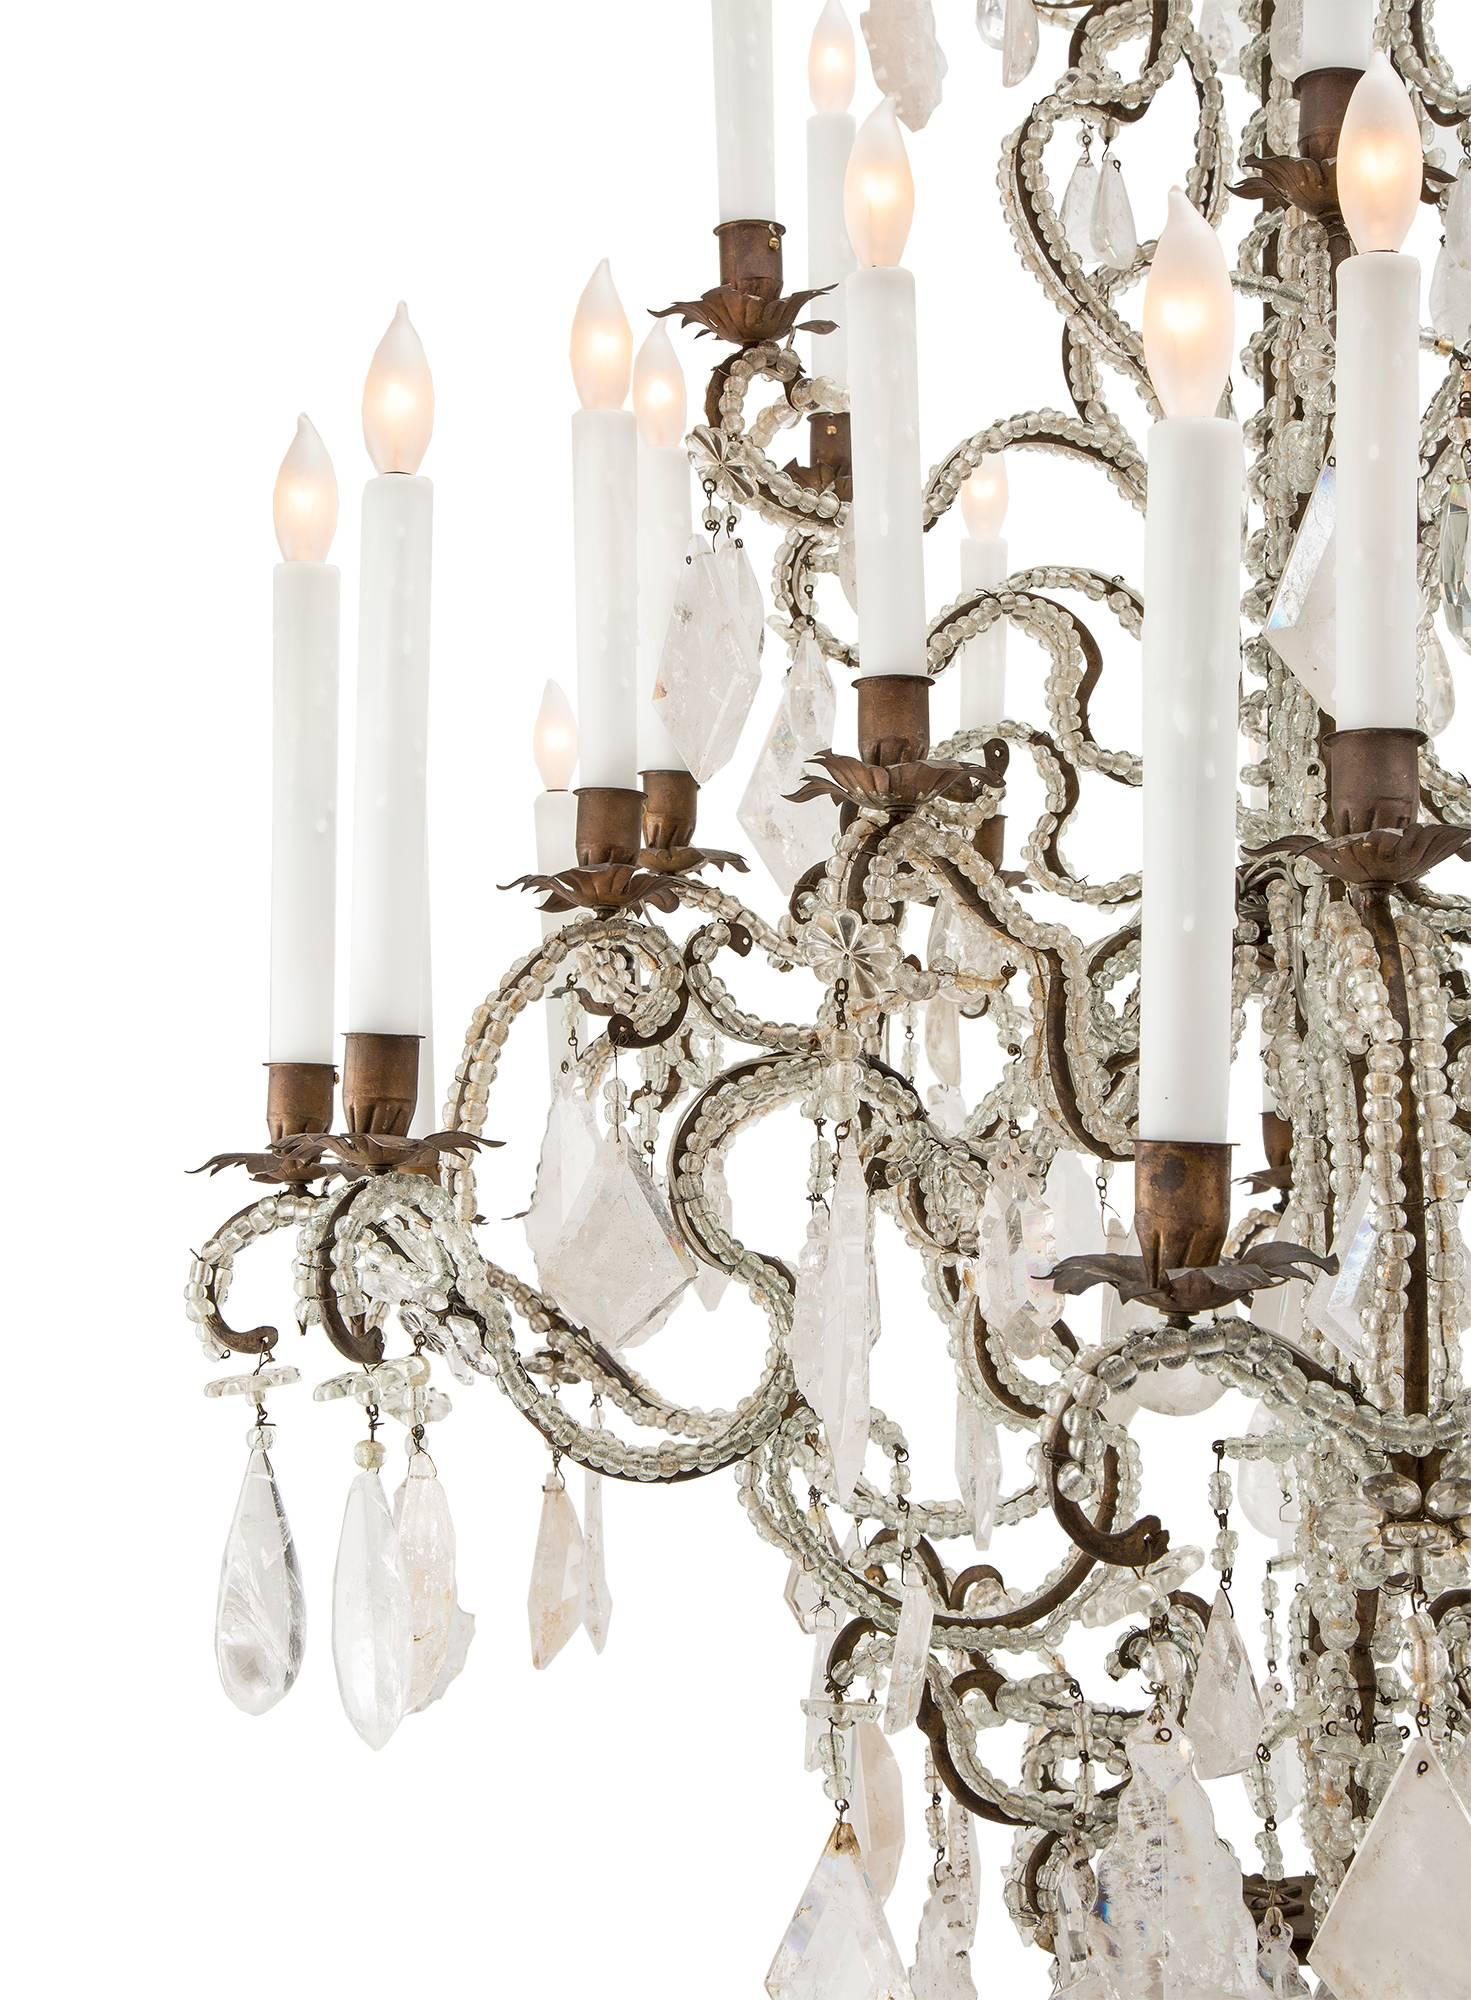 A sensational and large-scale Italian mid-18th century Louis XV Period rock crystal thirty light chandelier. The chandelier is centred by a most impressive solid rock crystal ball amidst fabulously cut rock crystal pendants. Each of the elegantly